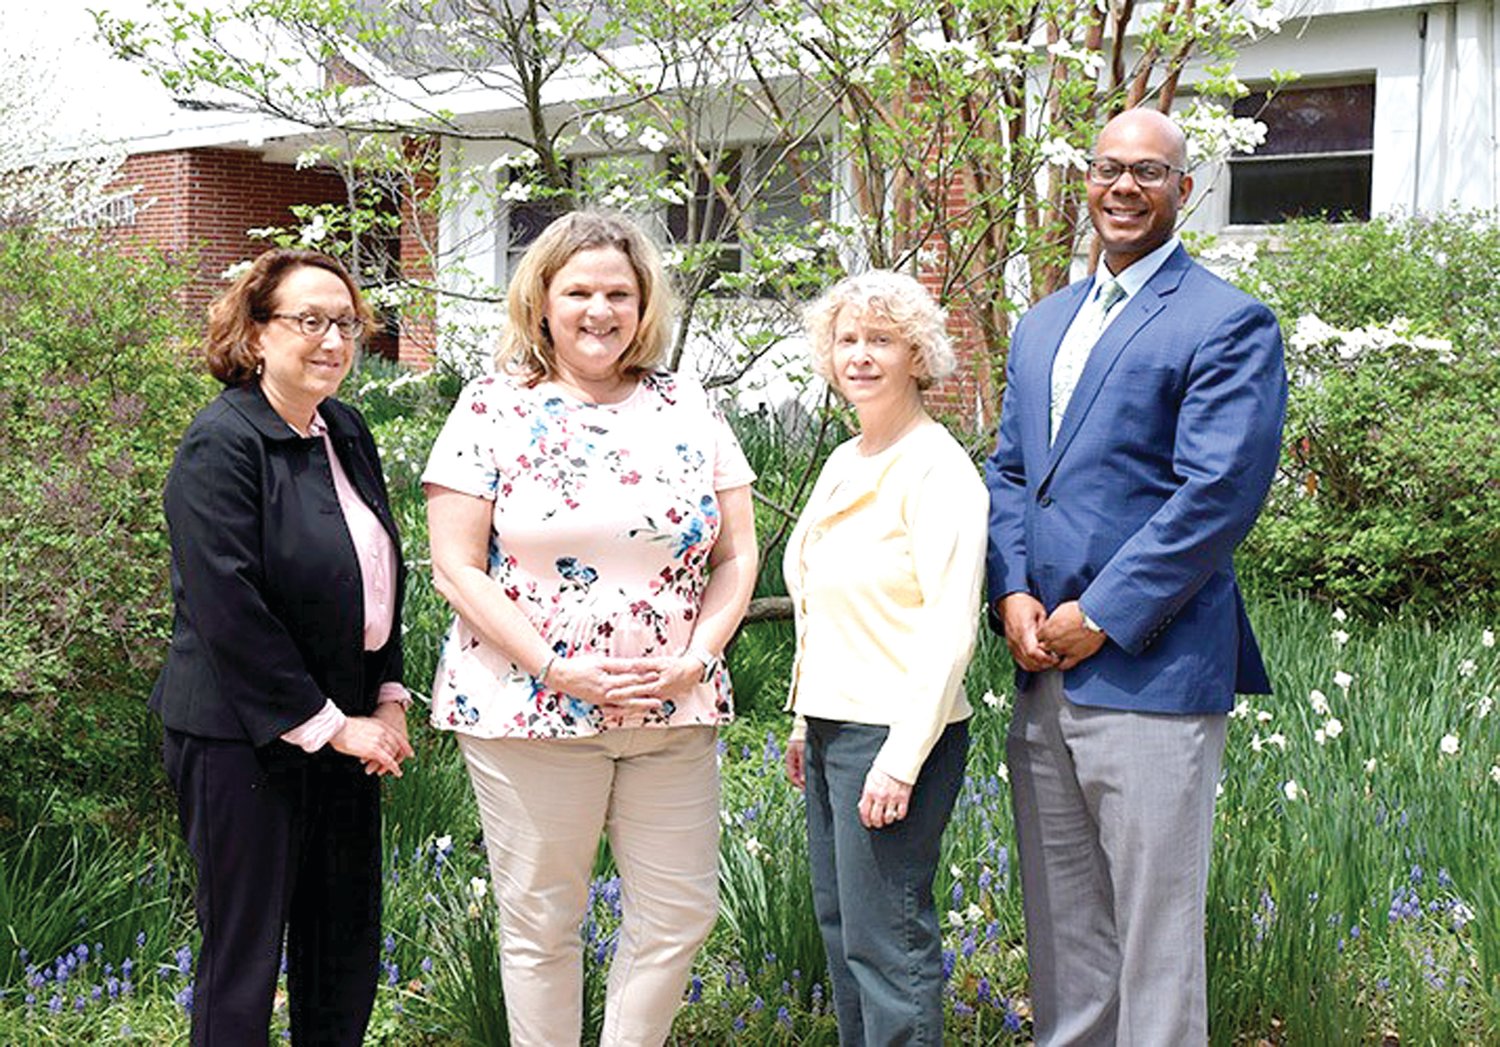 From left are: Delaware Valley University Director of Corporate and Foundation Relations Wendy Connuck, Charlotte W. Newcombe Foundation Associate Executive Director Lindsey G. Bohra, Charlotte W. Newcombe Foundation Executive Director Dr. Gianna Durso-Finley and Delaware Valley University Vice President for Development and Alumni Affairs Keith Richardson.